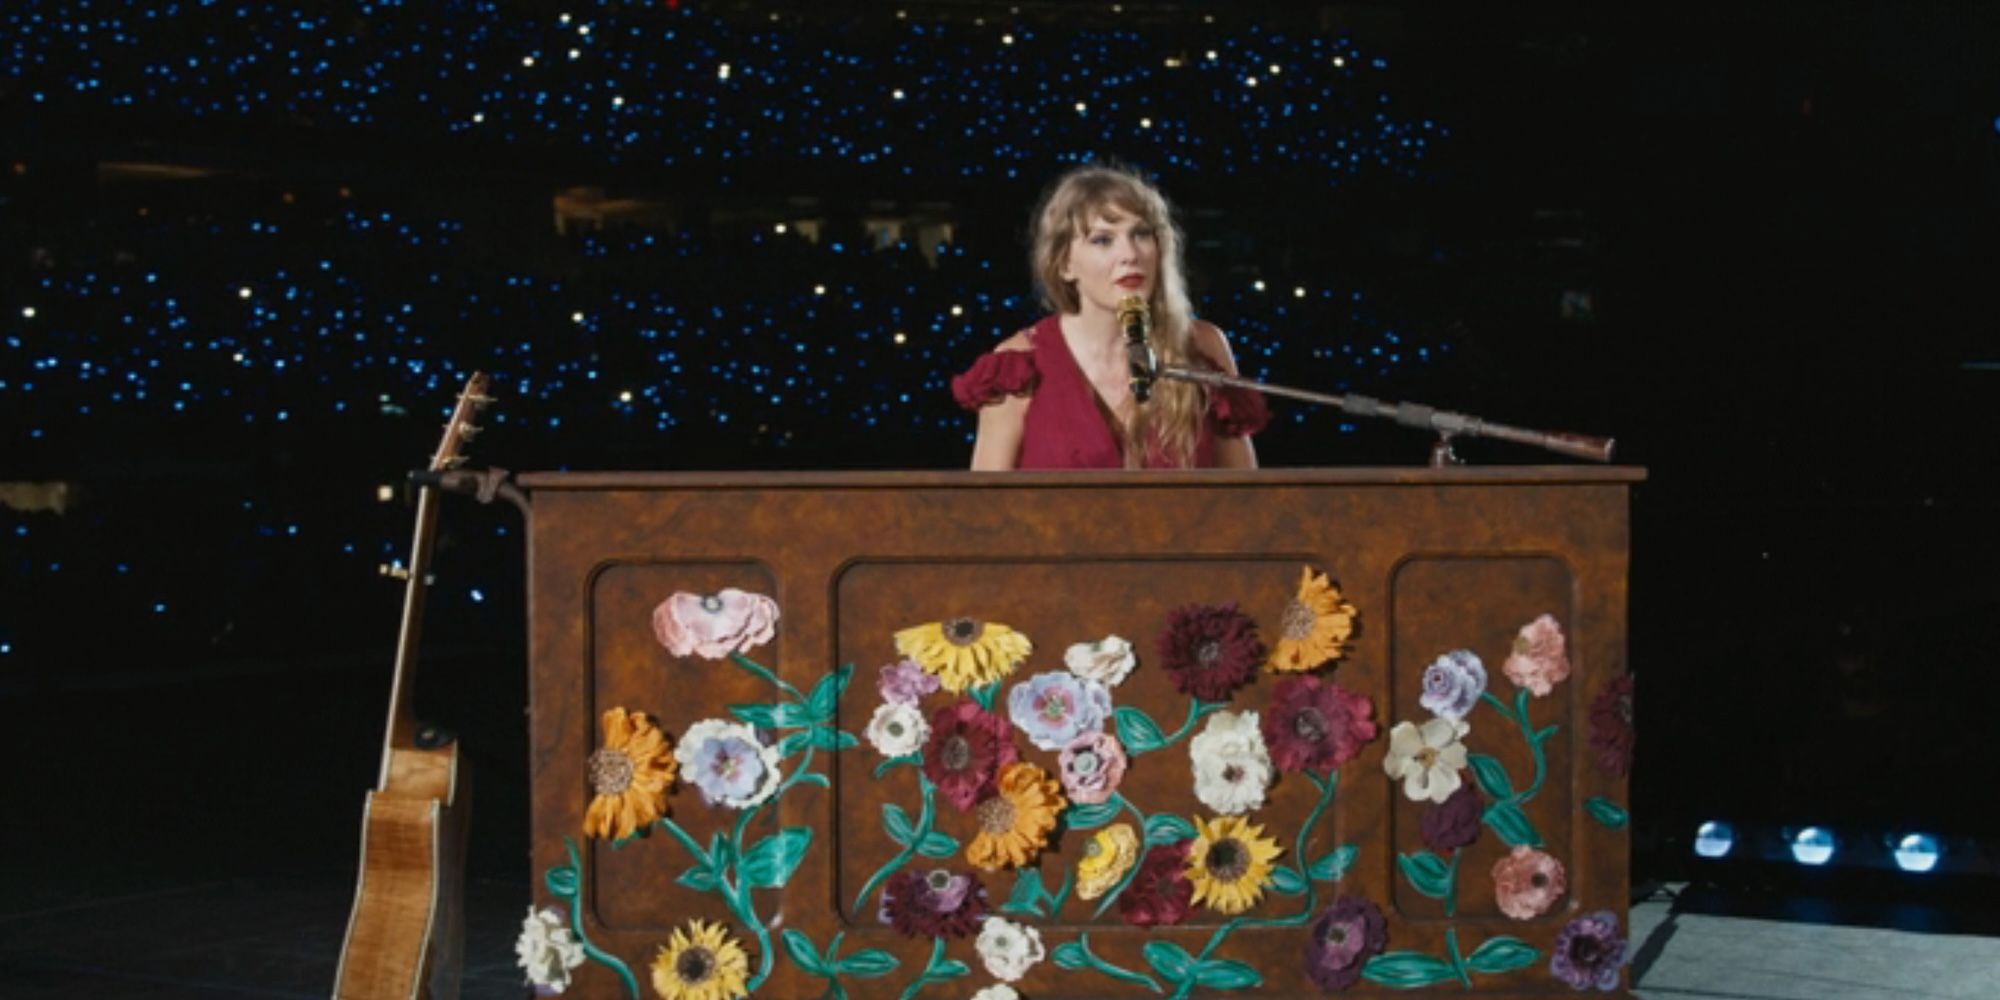 Taylor Swift sits at the piano during the acoustic set of the Eras Tour